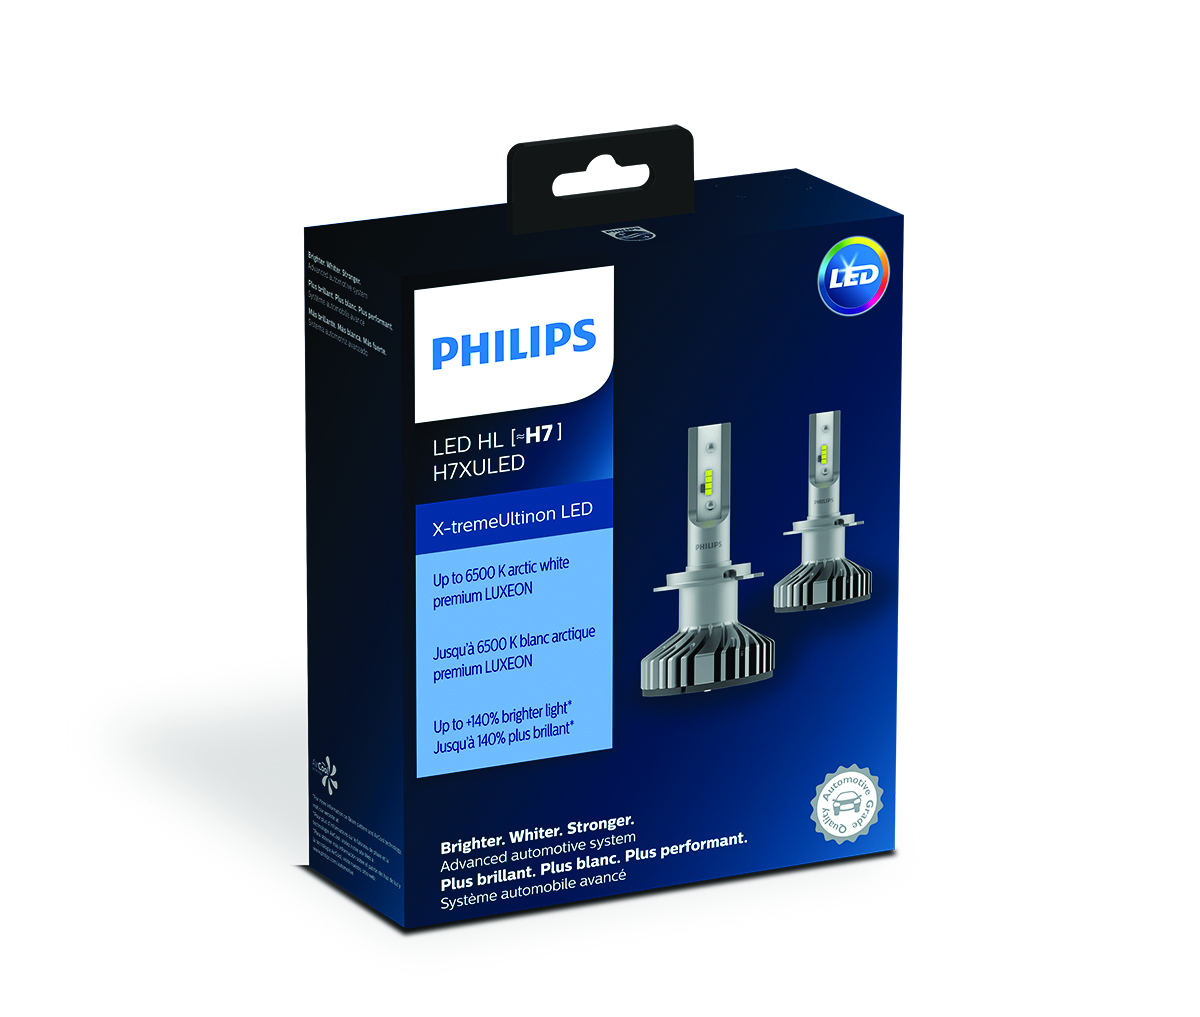 Lumileds introduces Phillips X-tremeUltinon LED headlights to Canadian market